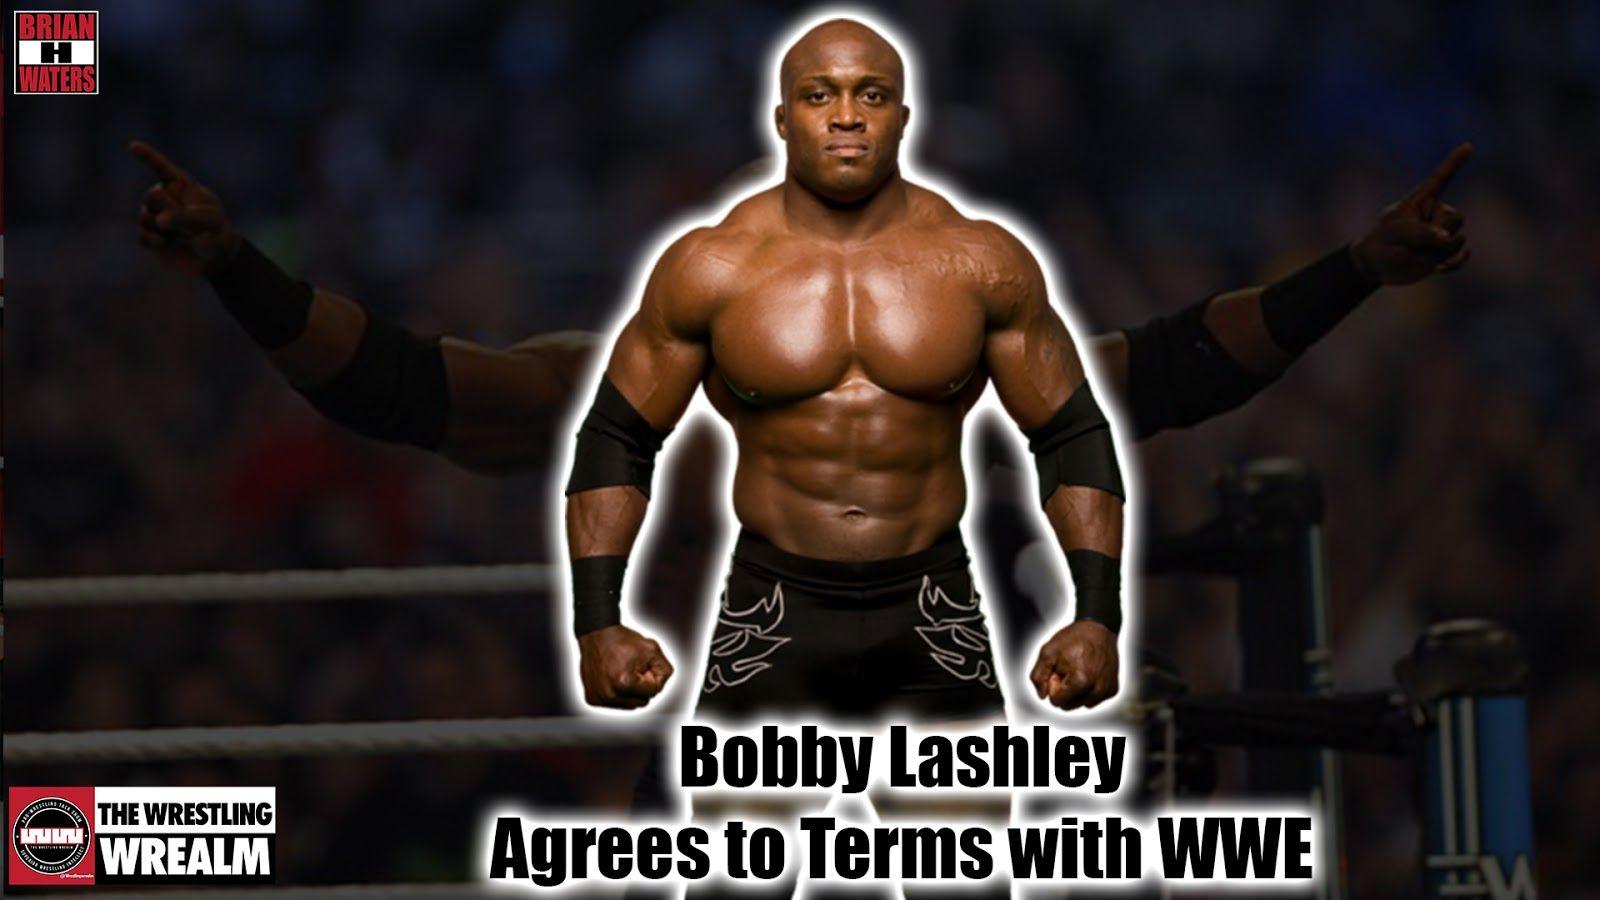 Brian H Waters: Bobby Lashley is going to